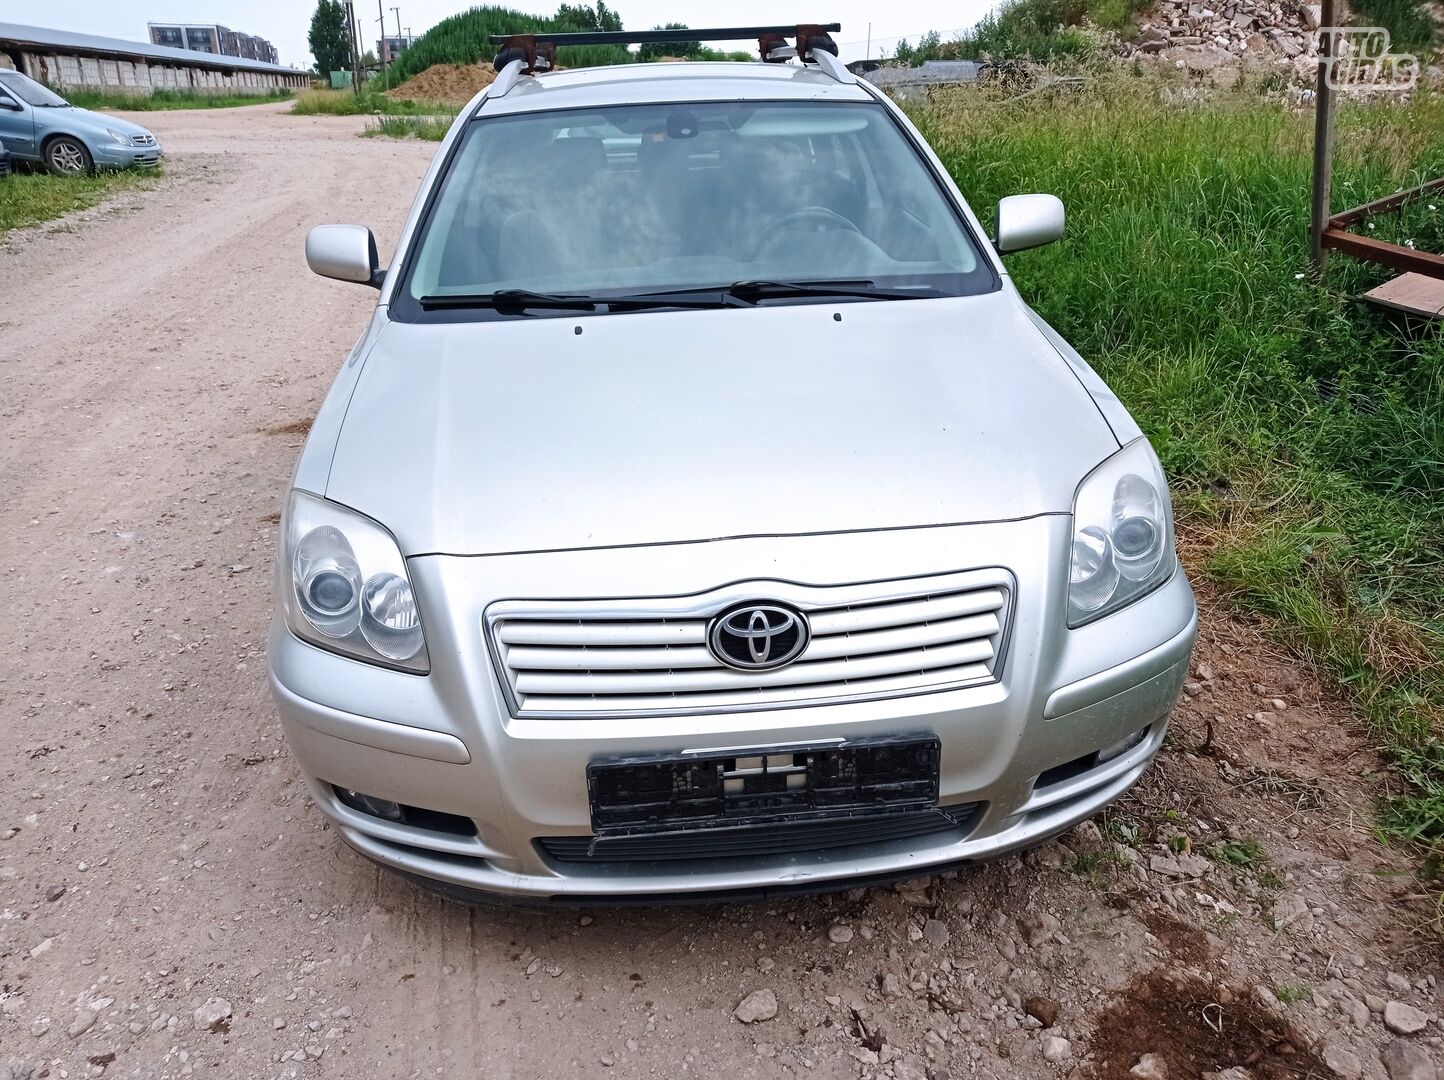 Toyota Avensis 2004 y parts